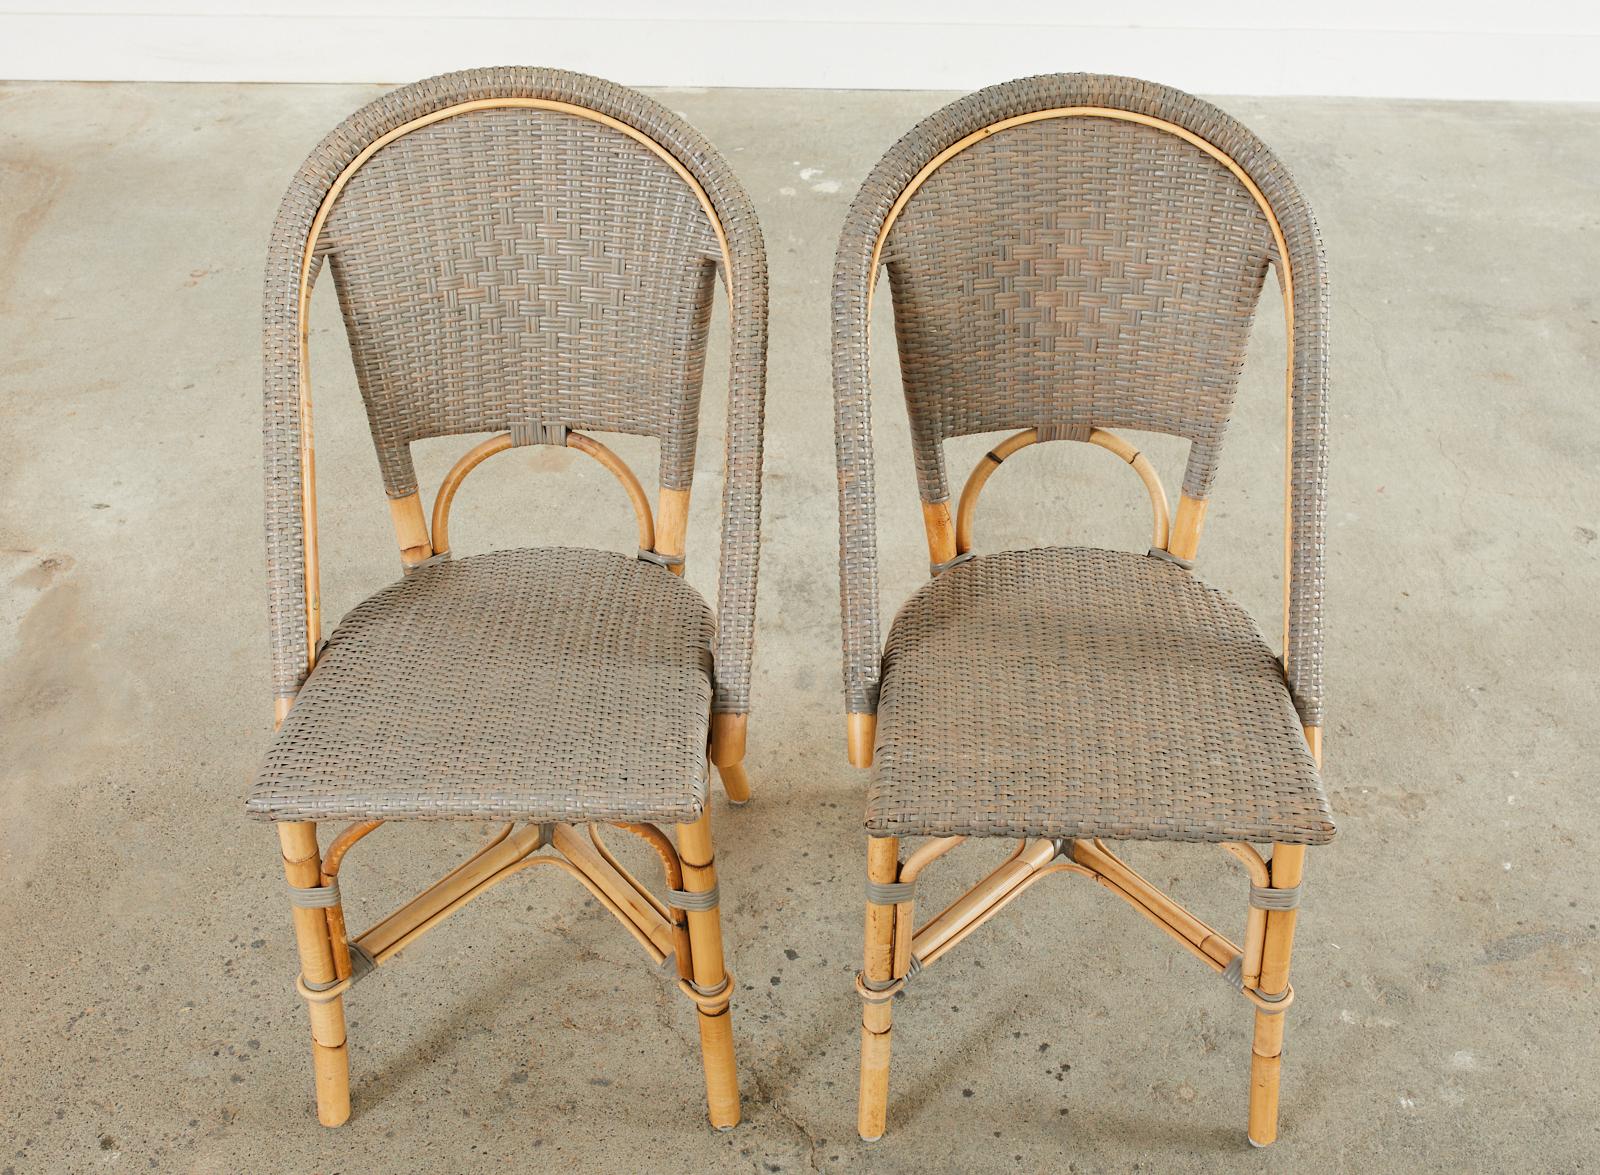 Organic Modern Set of Forty Serena and Lily Rattan Wicker Bistro Dining Chairs